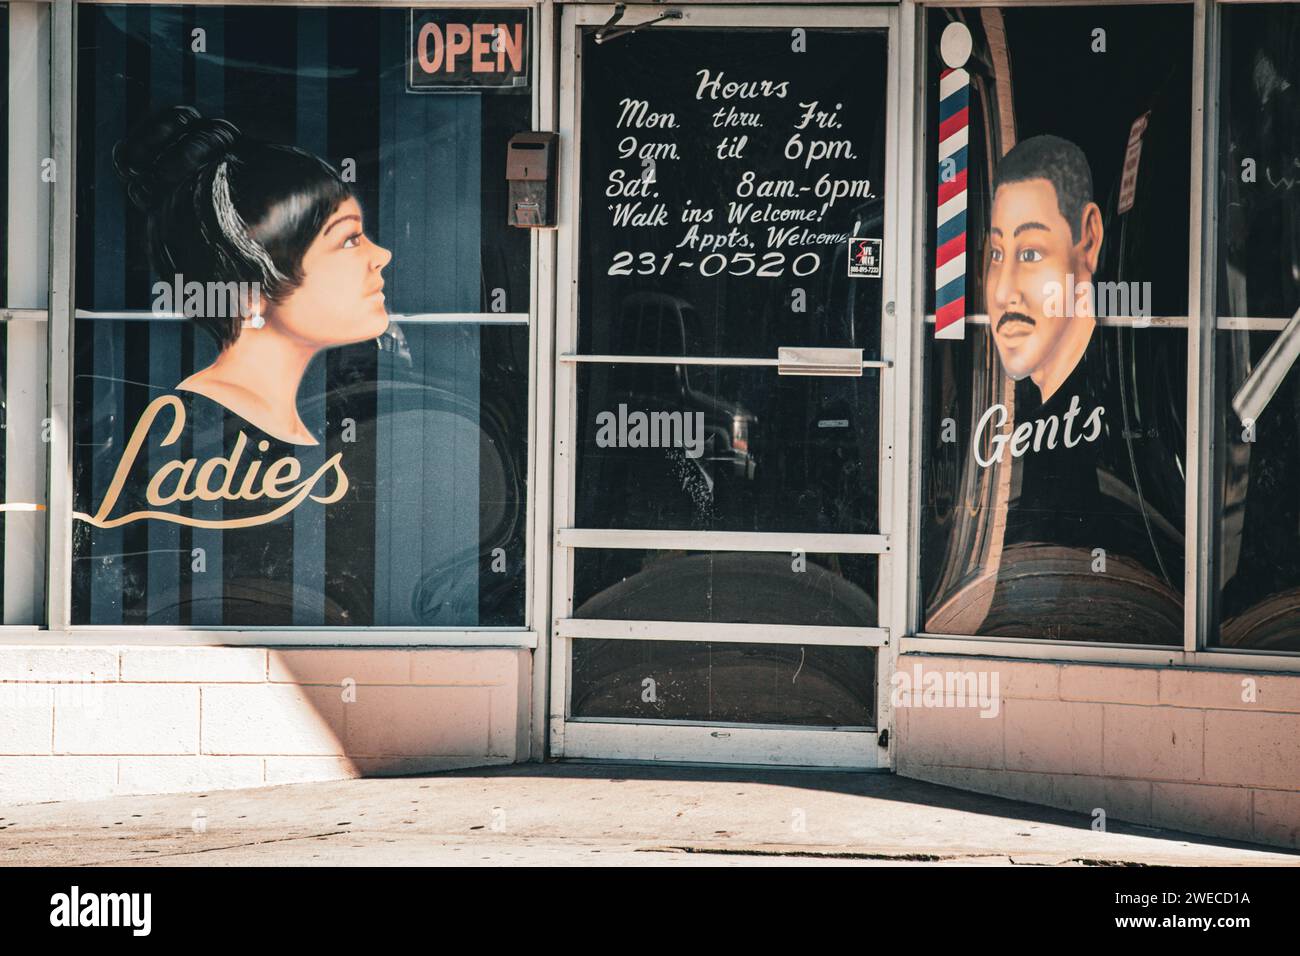 Facade of an African American Barbershop in Savannah Georgia with Hand Painted sign - First Class Beauty and Barber Black History Stock Photo